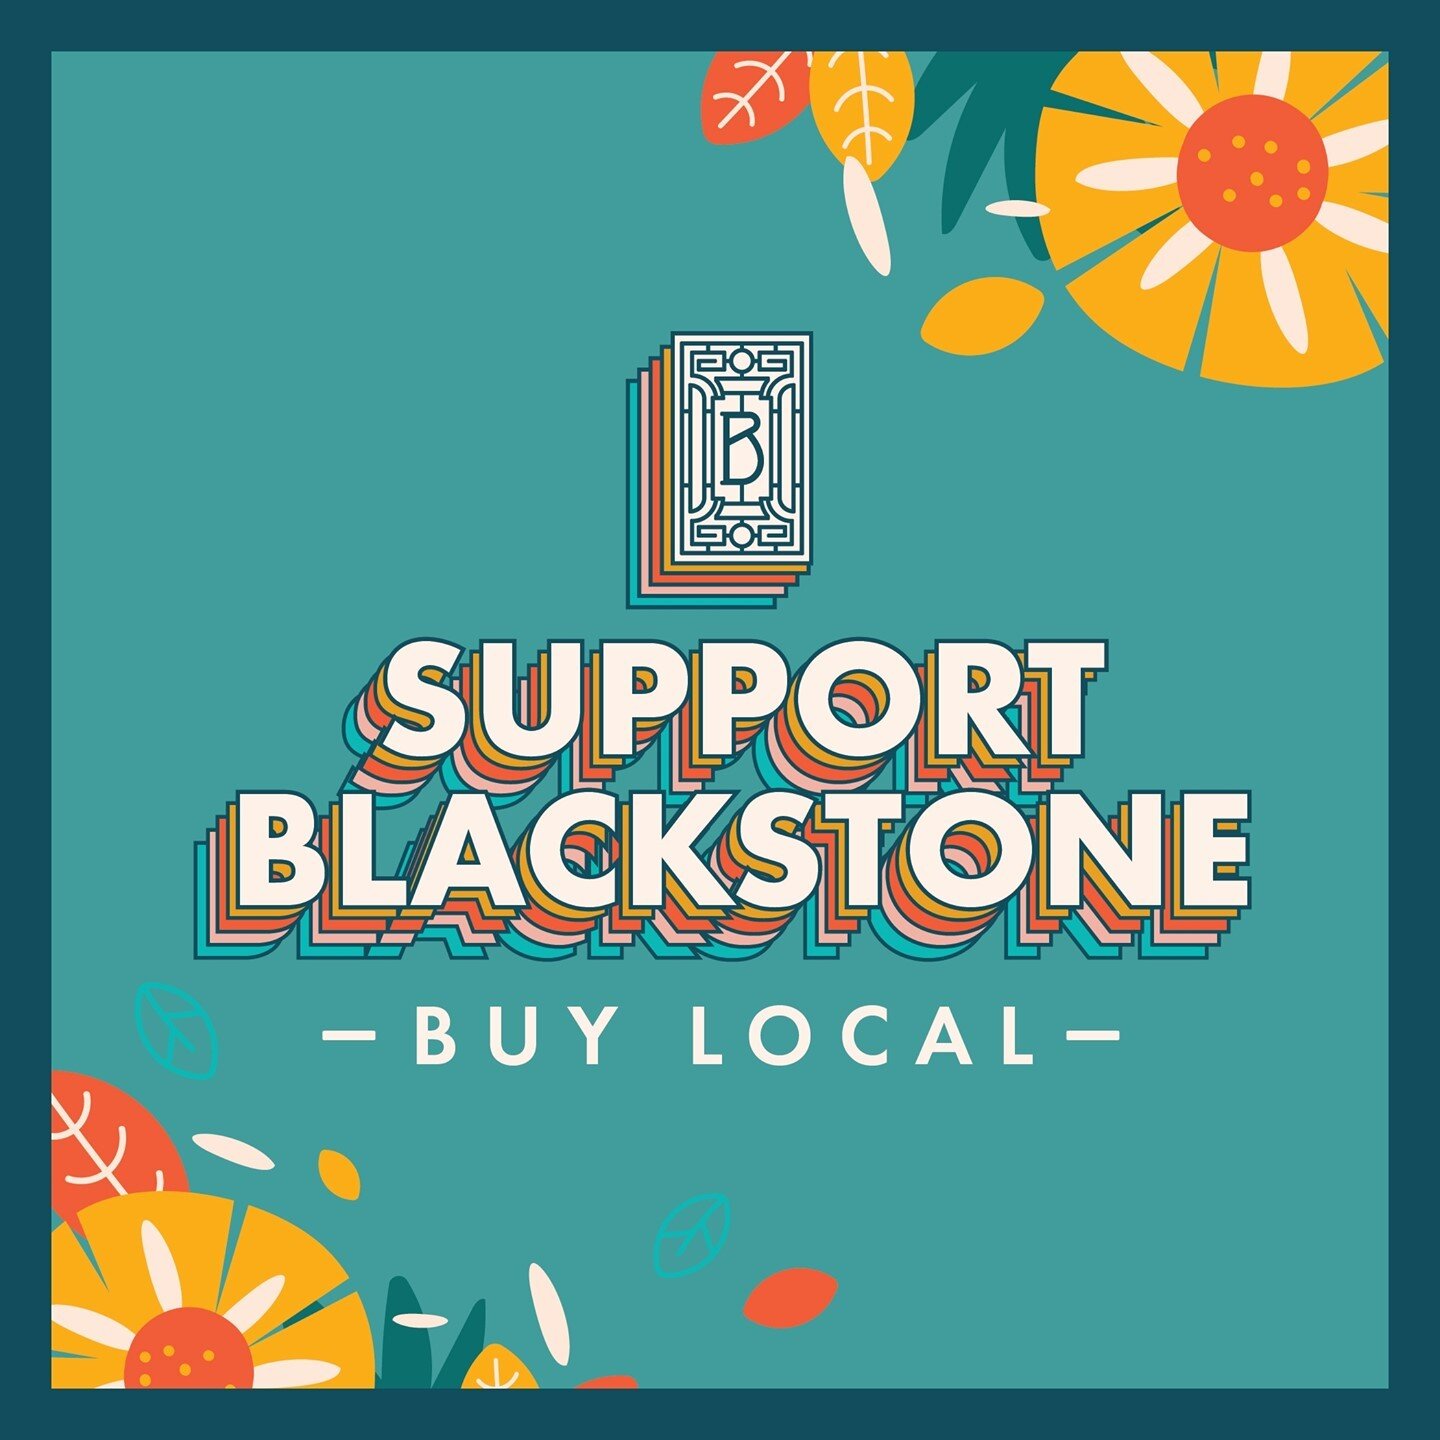 ☀️ It&rsquo;s always a good day to SUPPORT LOCAL and SUPPORT BLACKSTONE! ☀️